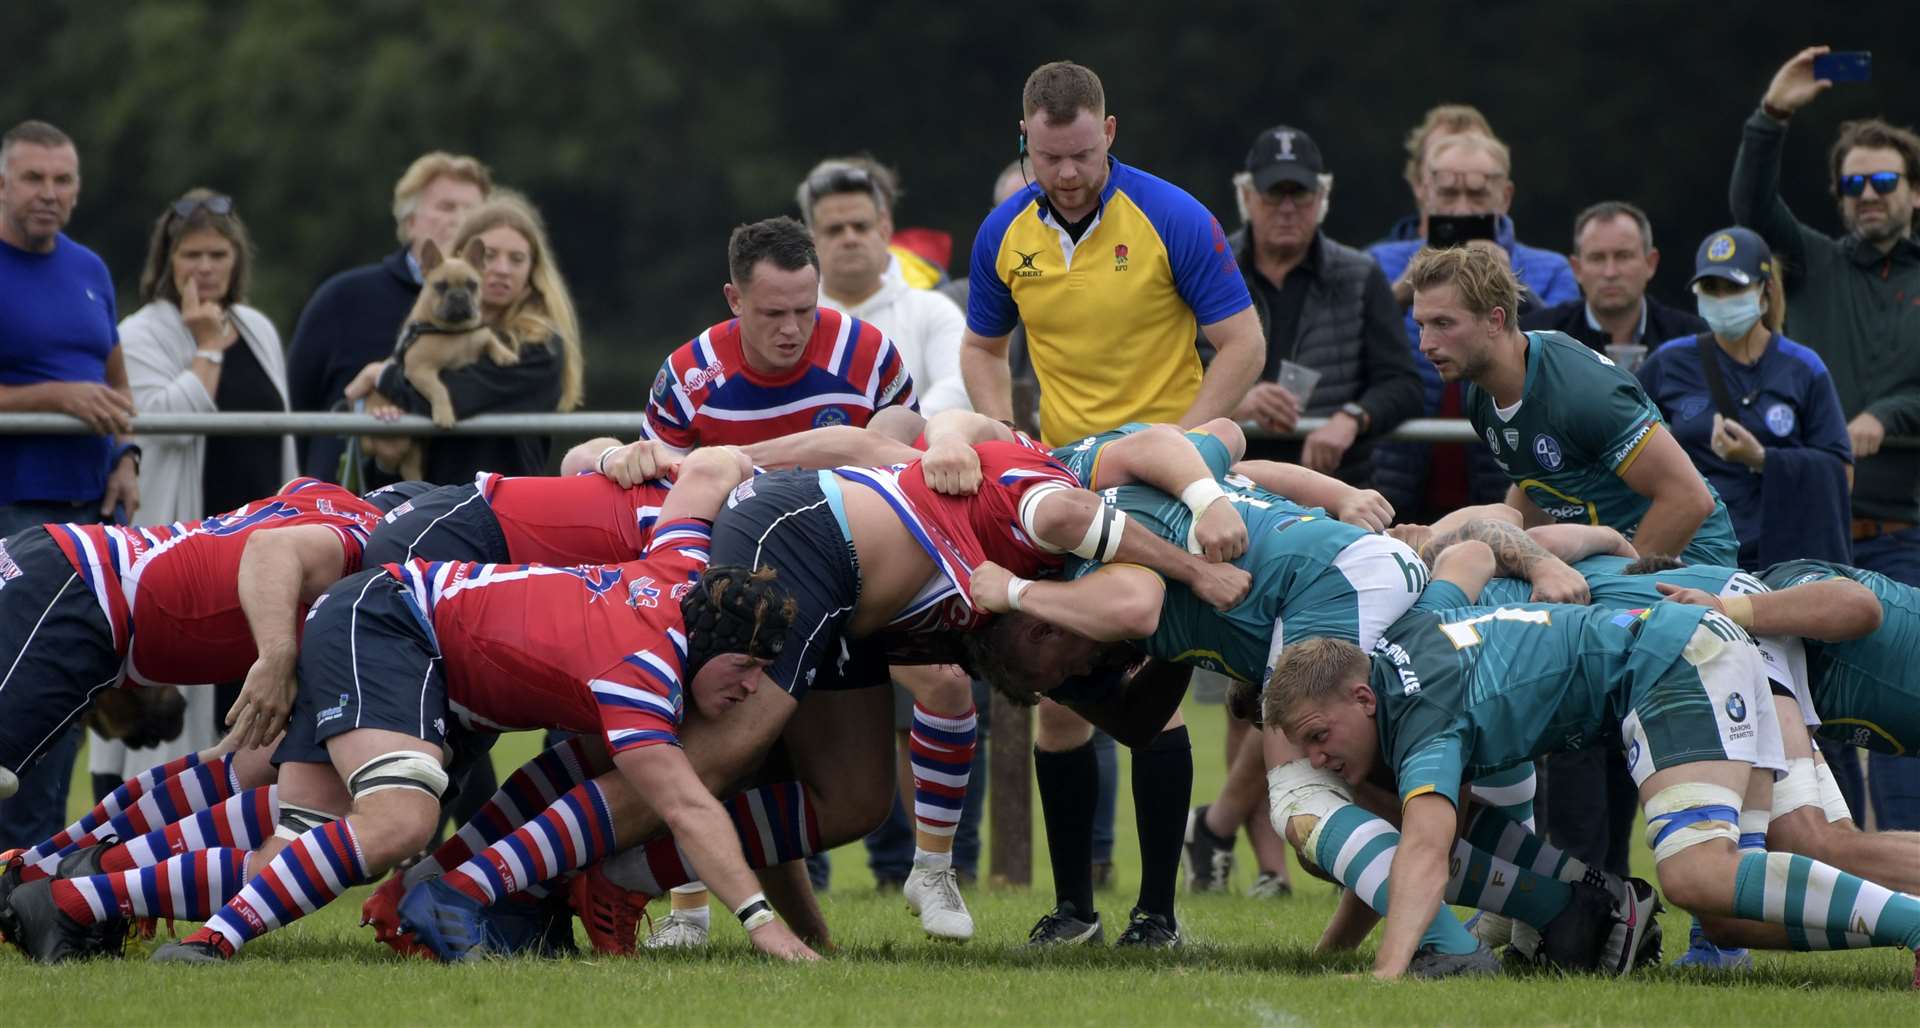 Juddians and Bishop's Stortford engage at the scrum.Picture: Barry Goodwin (50899761)